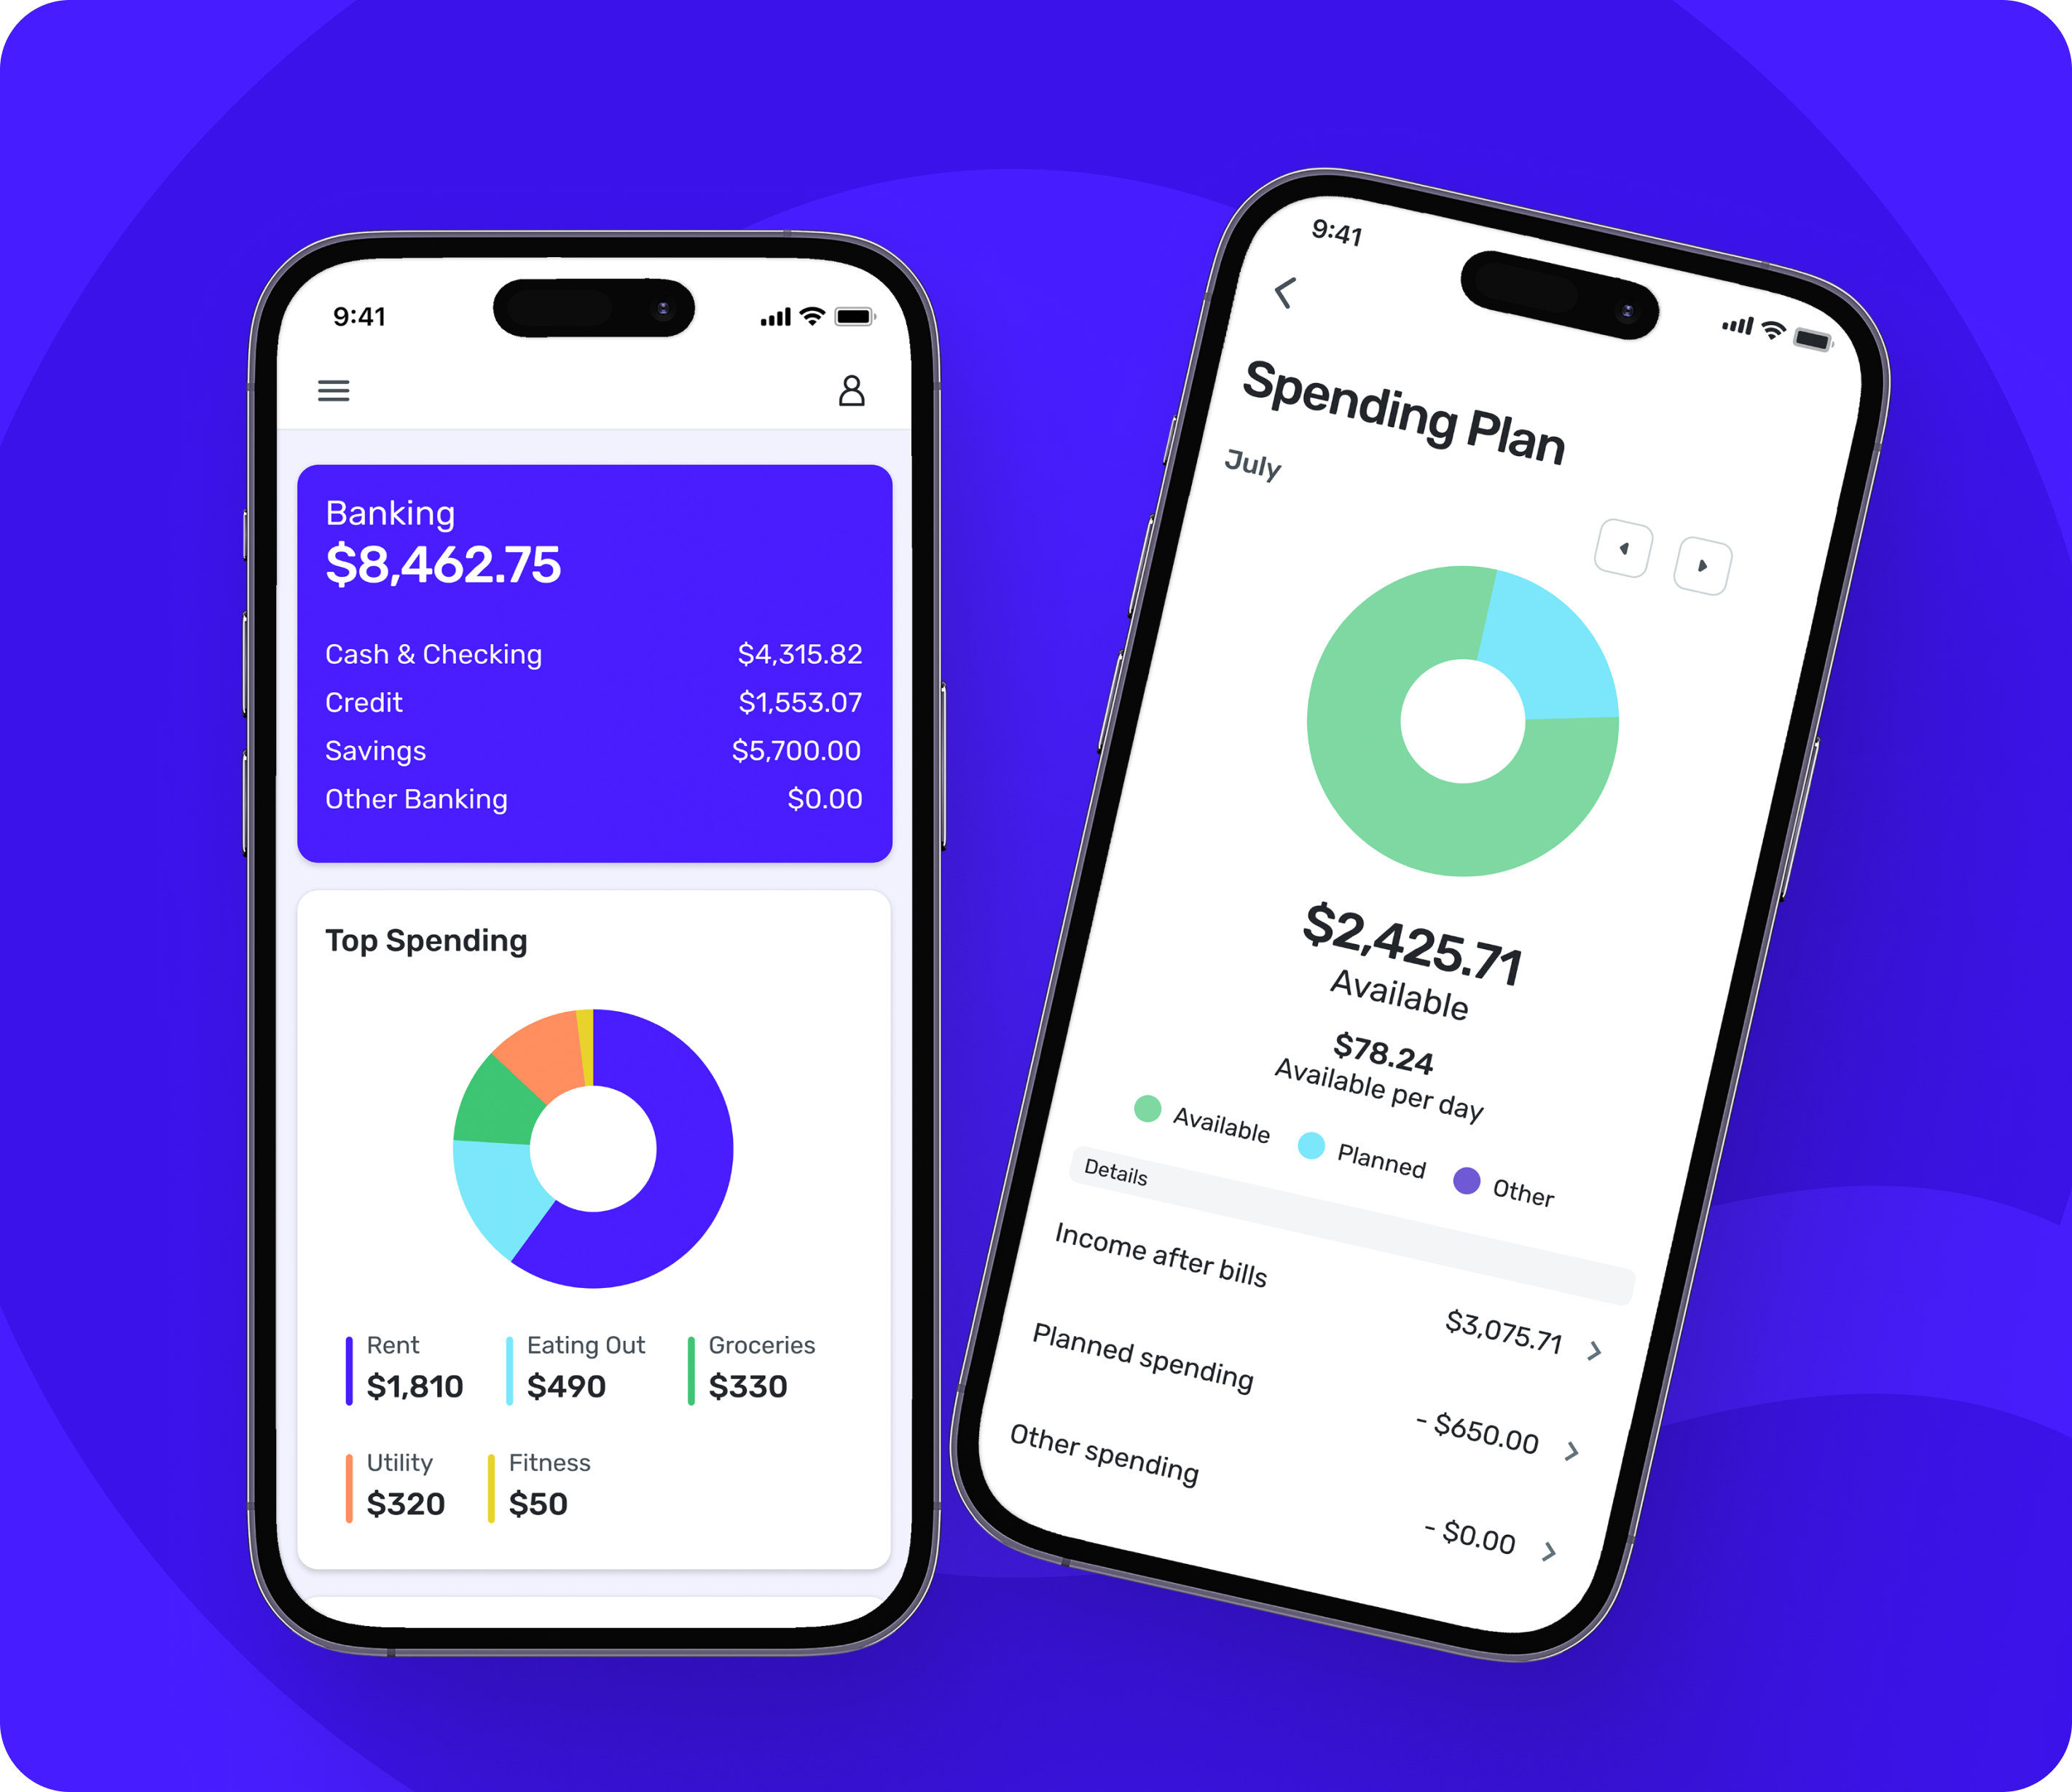 Mint Switch Hero displays spending plans and top spending plans from the mobile interface.